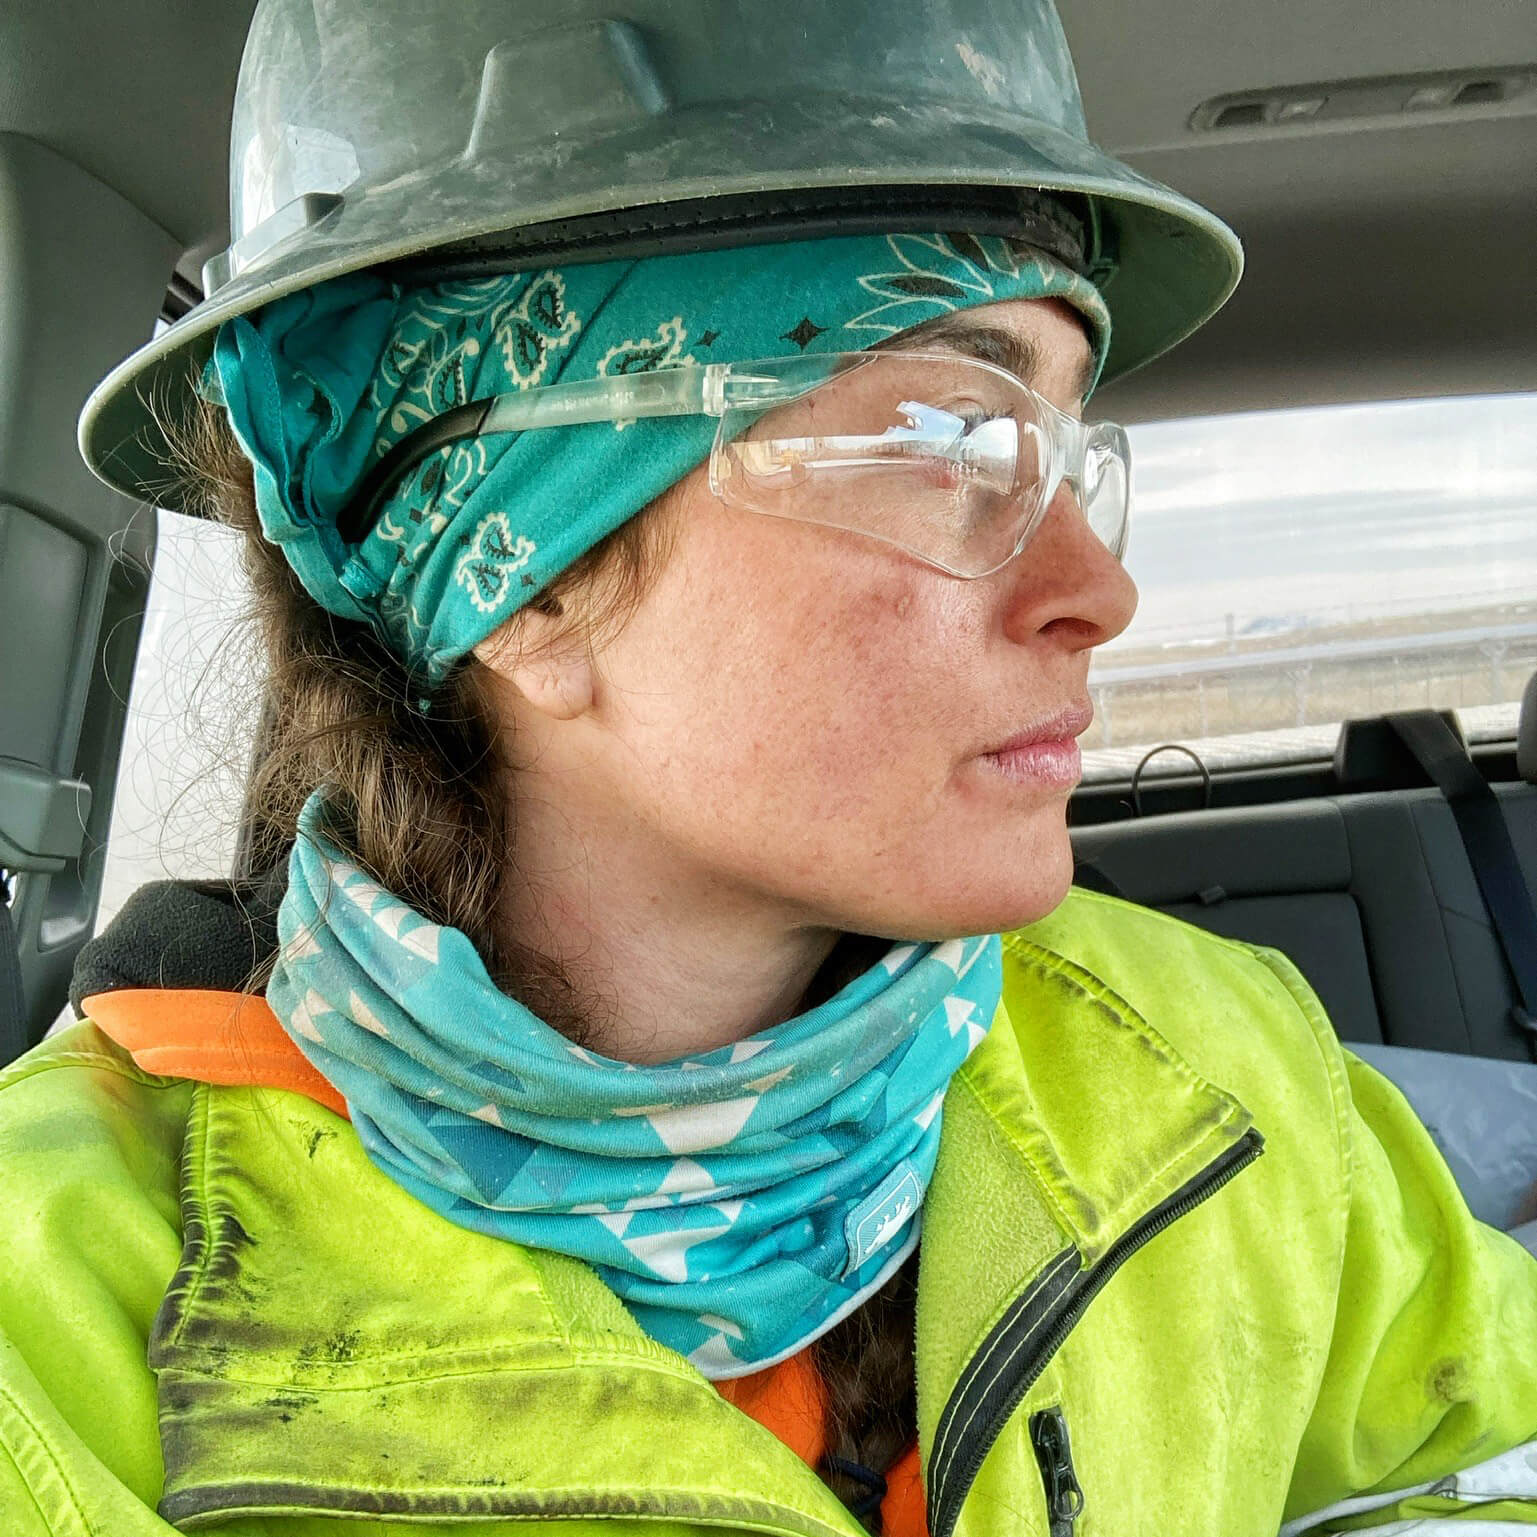 Woman with safety gear